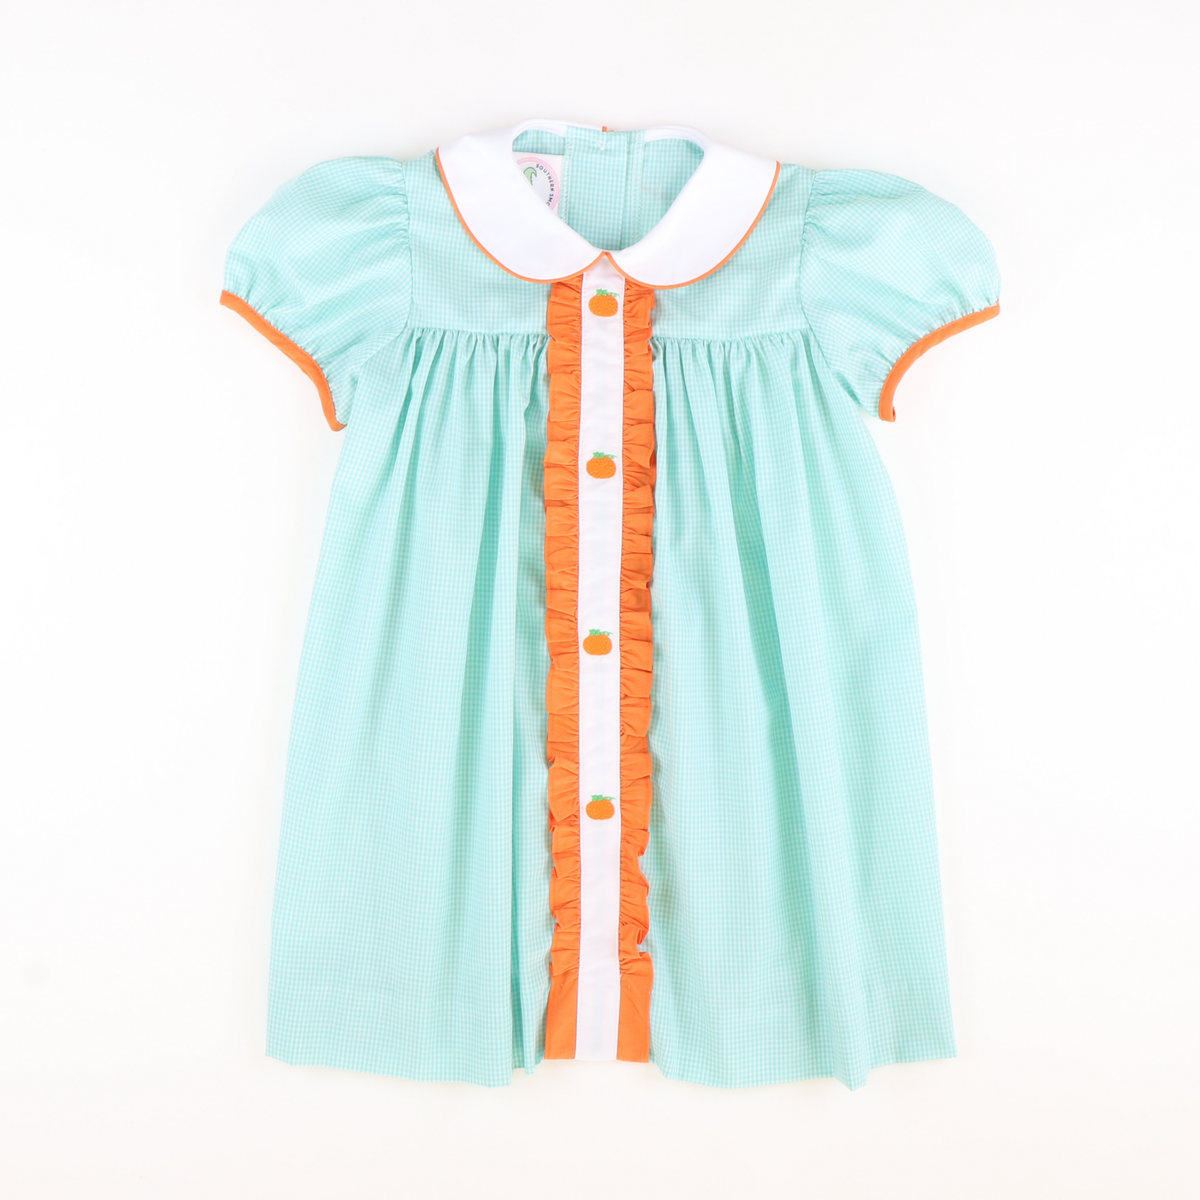 Embroidered Pumpkins Collared Dress - Mint Mini Gingham